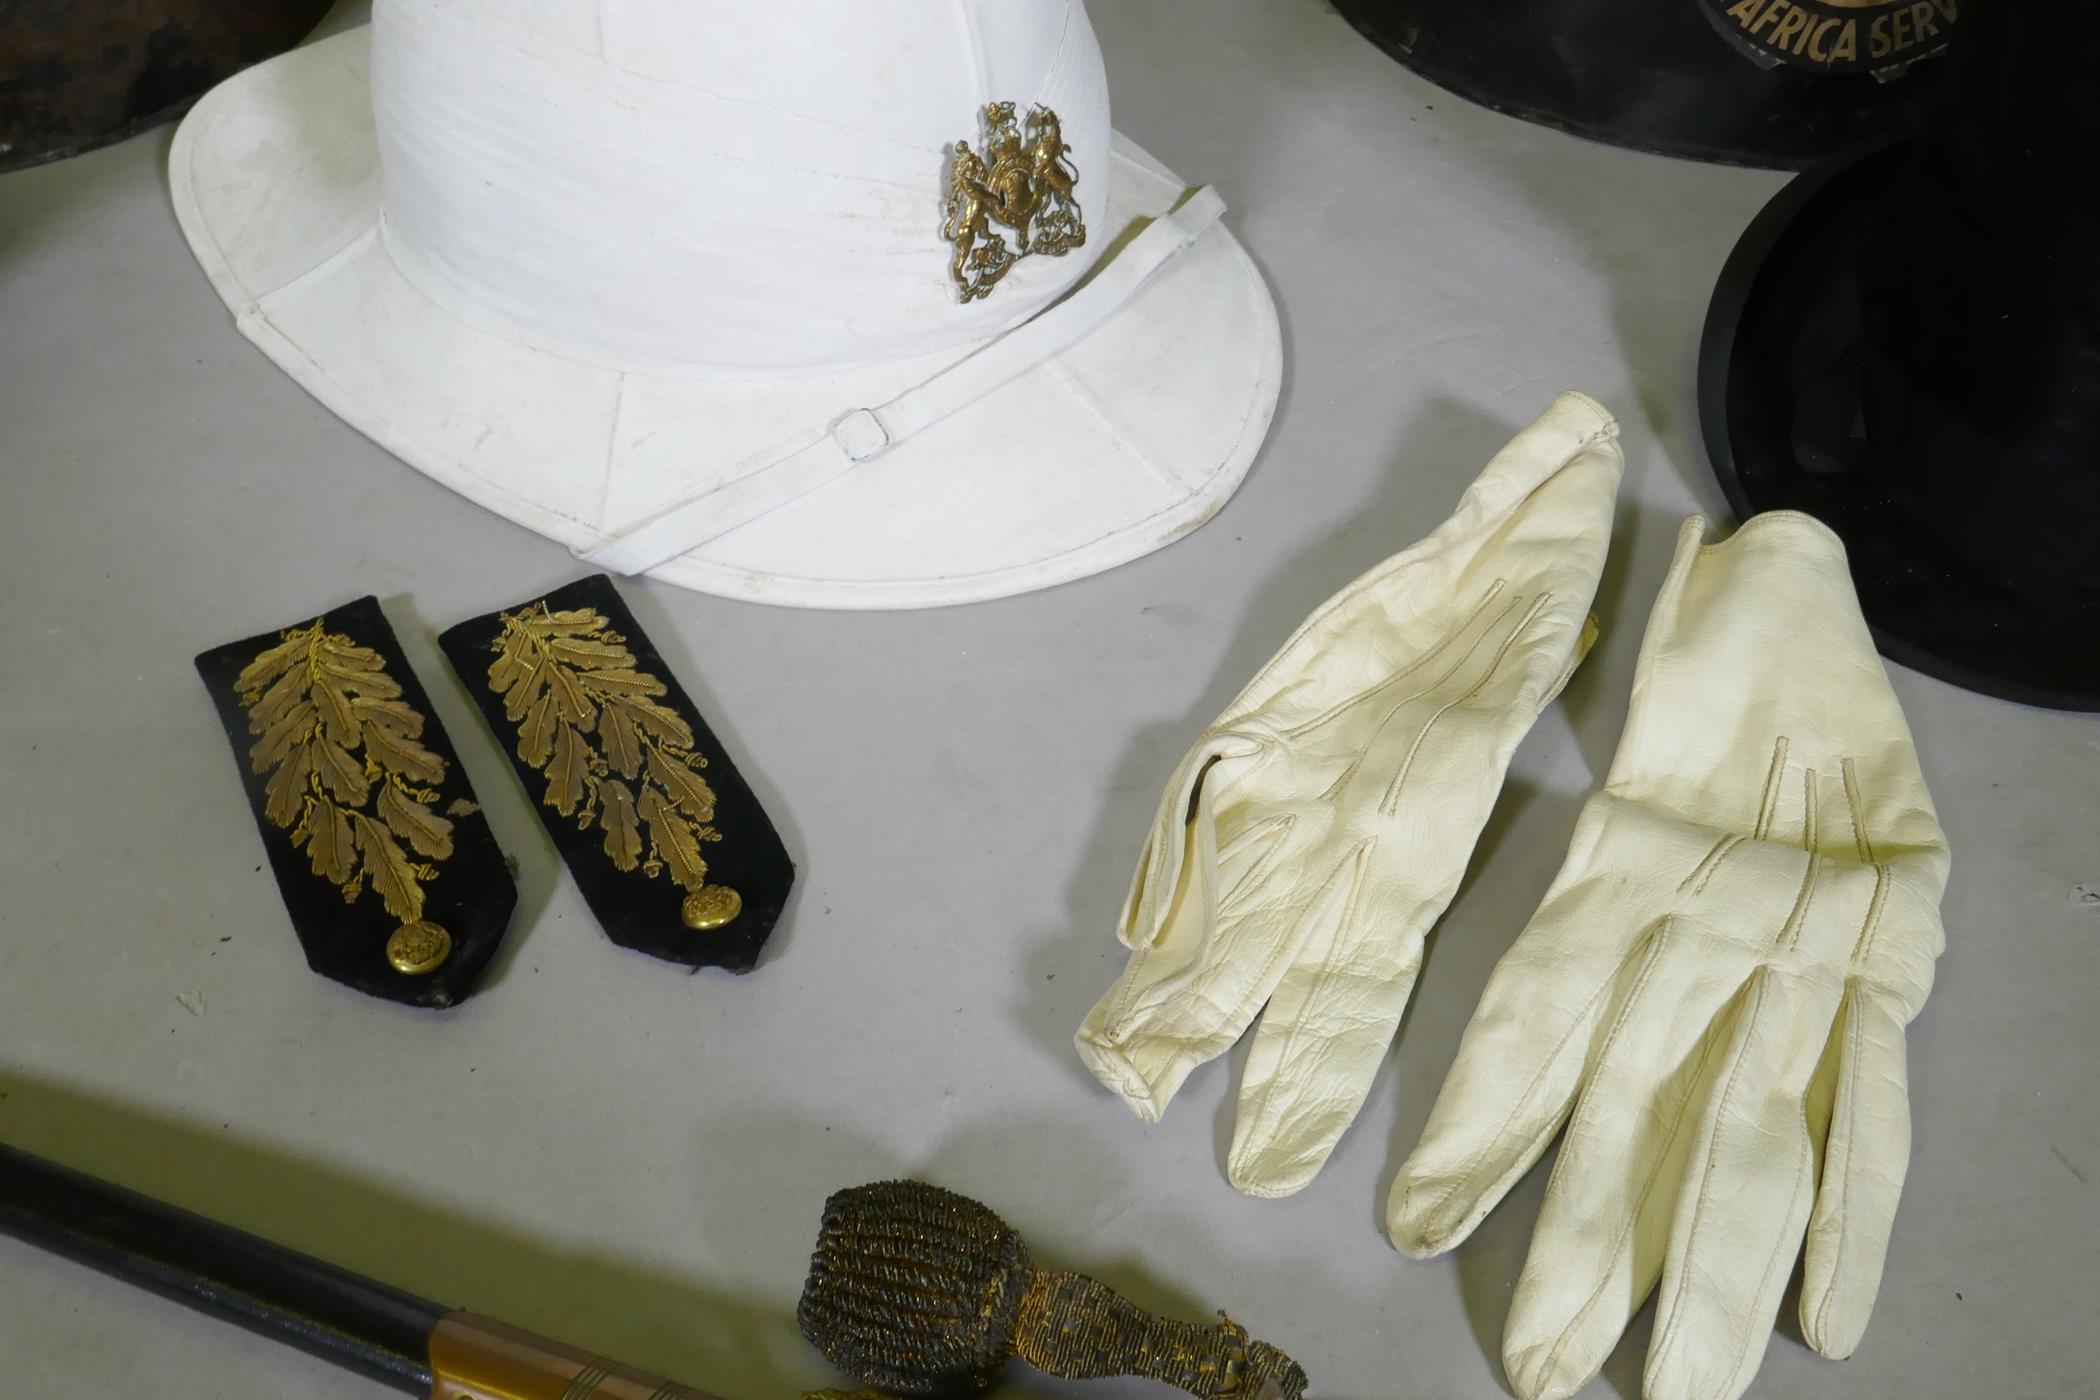 A George V British colonial service diplomatic corps court sword, pith helmet, epaulettes and cap - Image 2 of 8